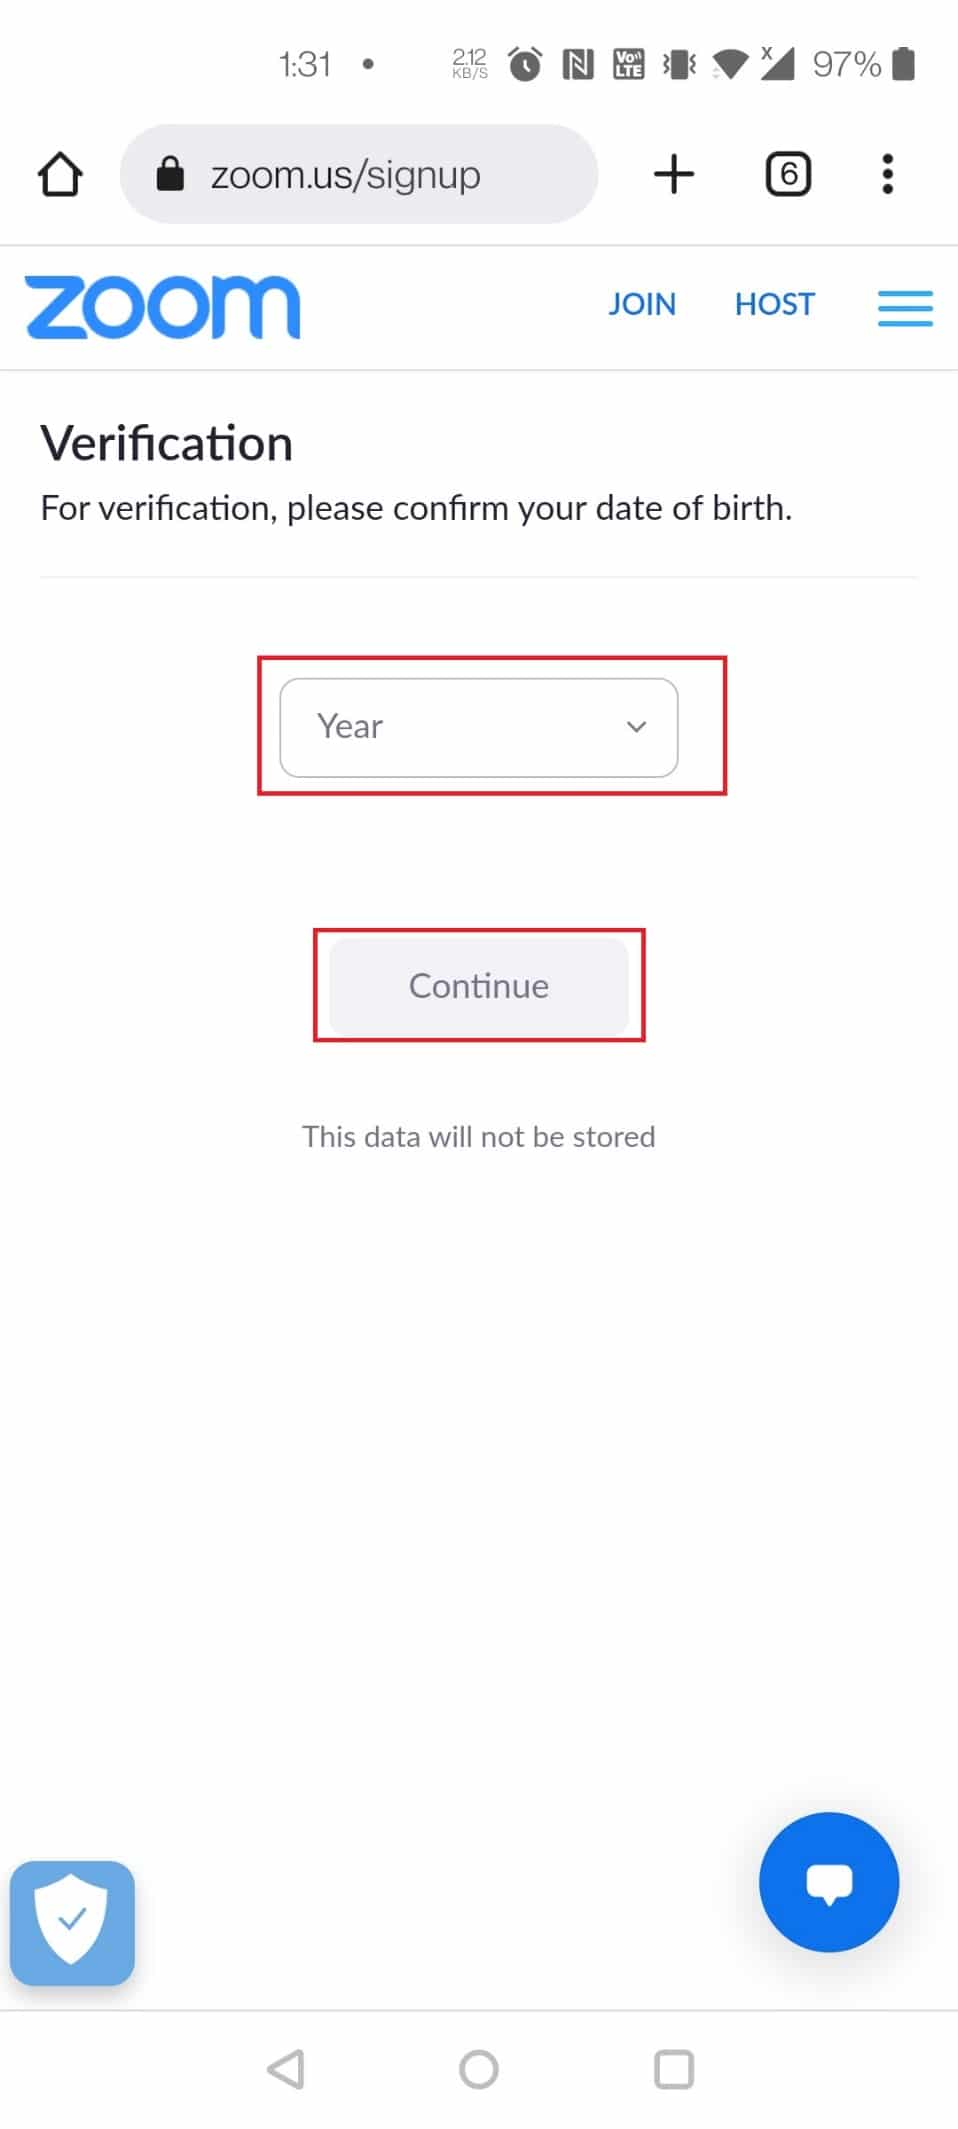 Select your birth year for verification and tap on the Continue button